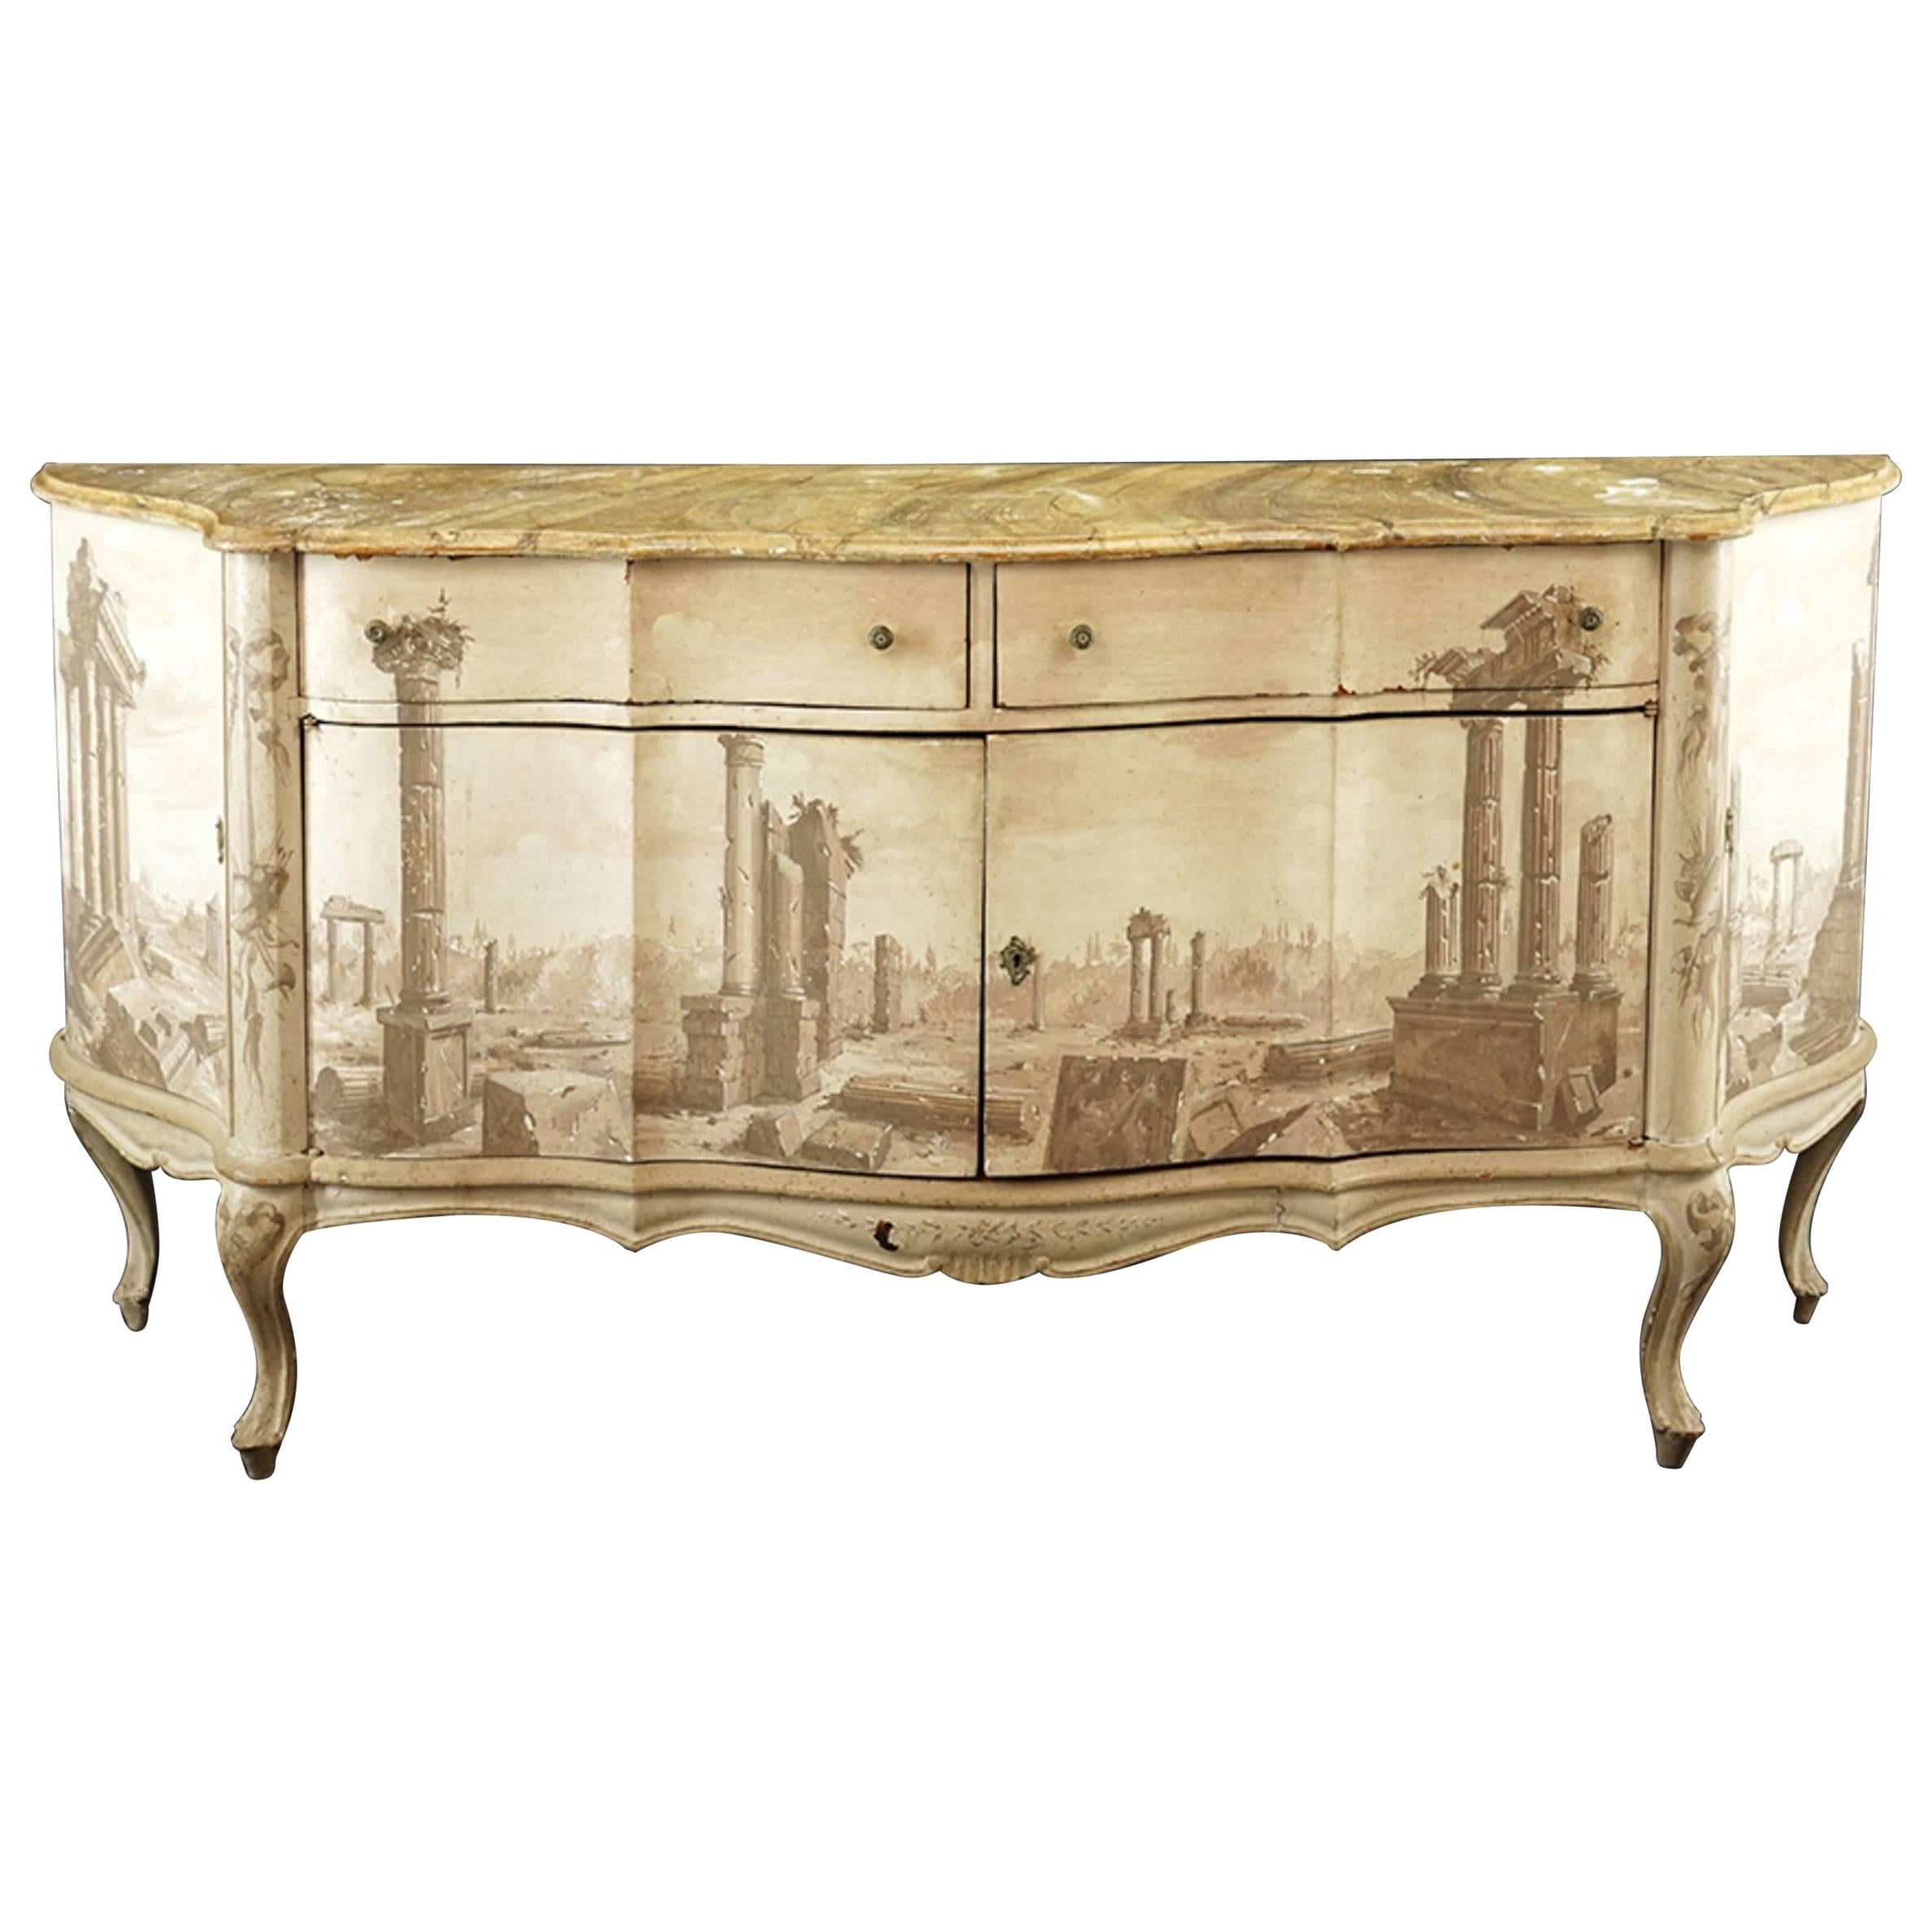  Italian Trompe L 'Oeil Sideboard In The Style Of Fornasette.    For Sale